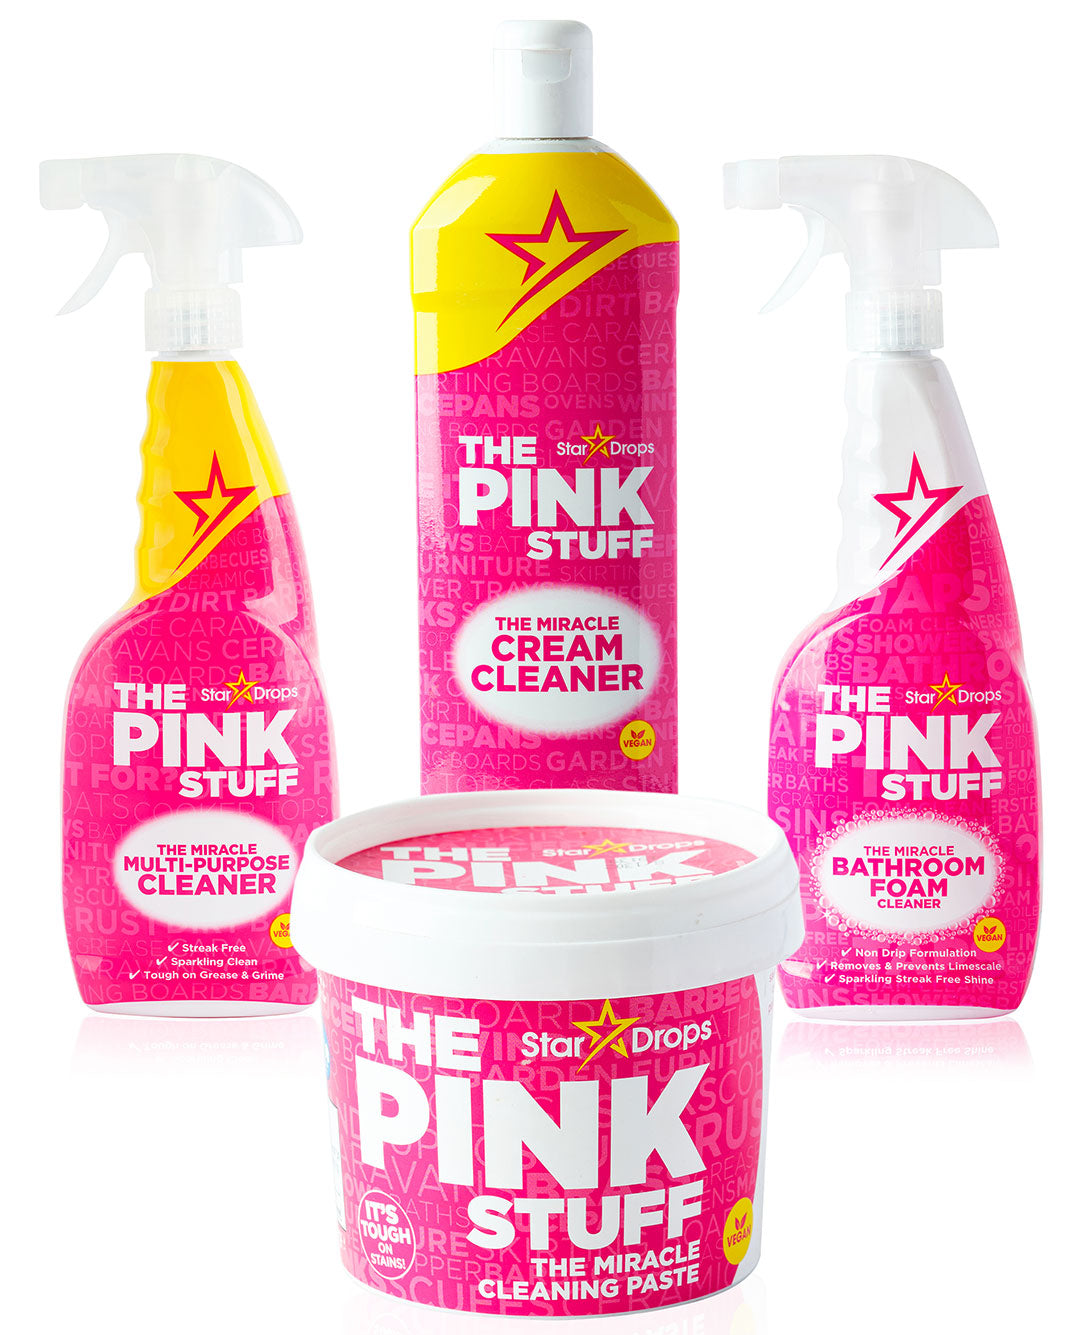 370 Cool Pink Stuff ideas  pink, everything pink, tickled pink